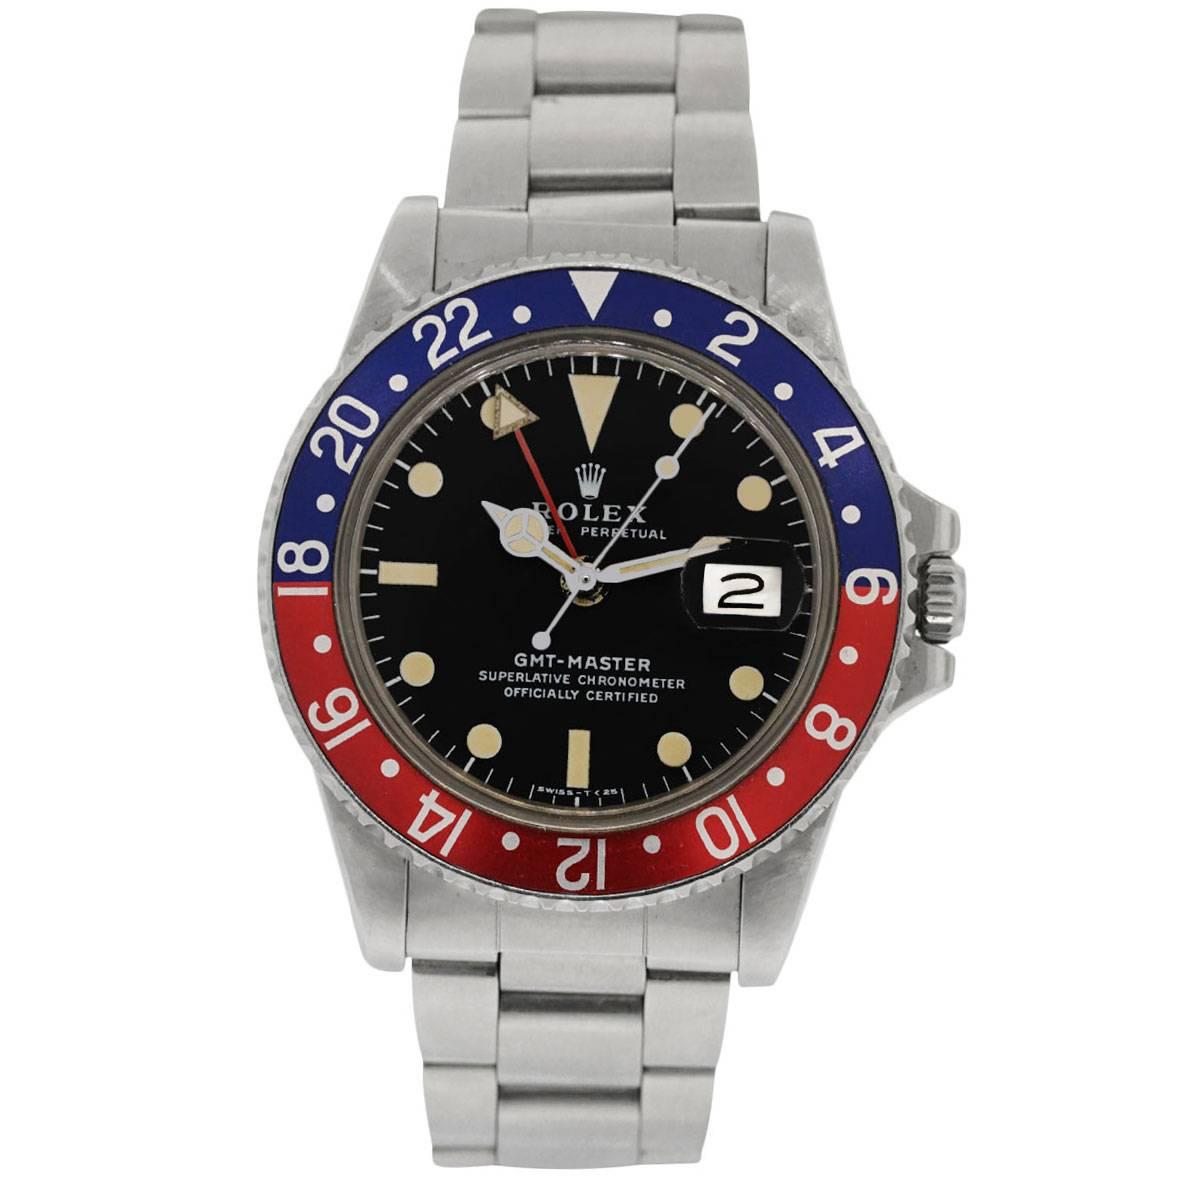 Brand: Rolex
Model: GMT Master
MPN: 1675
Case Material: Stainless Steel
Case Diameter: 40 mm
Bezel: Pepsi Bezel
Dial: Black Dial
Movement: Automatic
Size:	 Will fit a 7" wrist
SKU: "2 Mill"
Additional Details: This Item Comes with